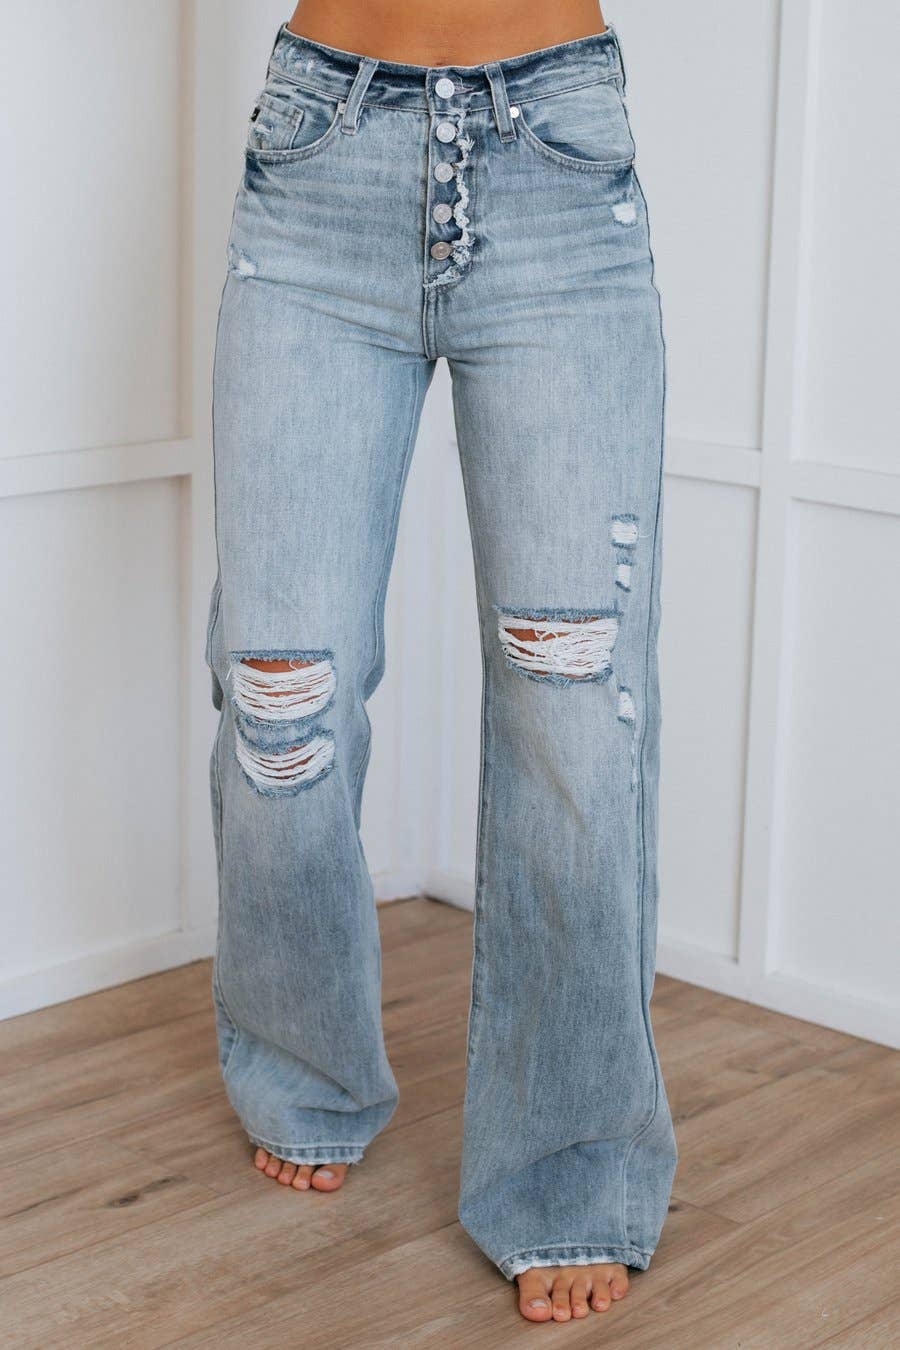 Ready Stock-Mid Waisted Stretch Flare Jeans Women Denim Pants Wide Leg  Butt-lifted Casual Korean Style Skinny Bell Bottom Pocket Trousers